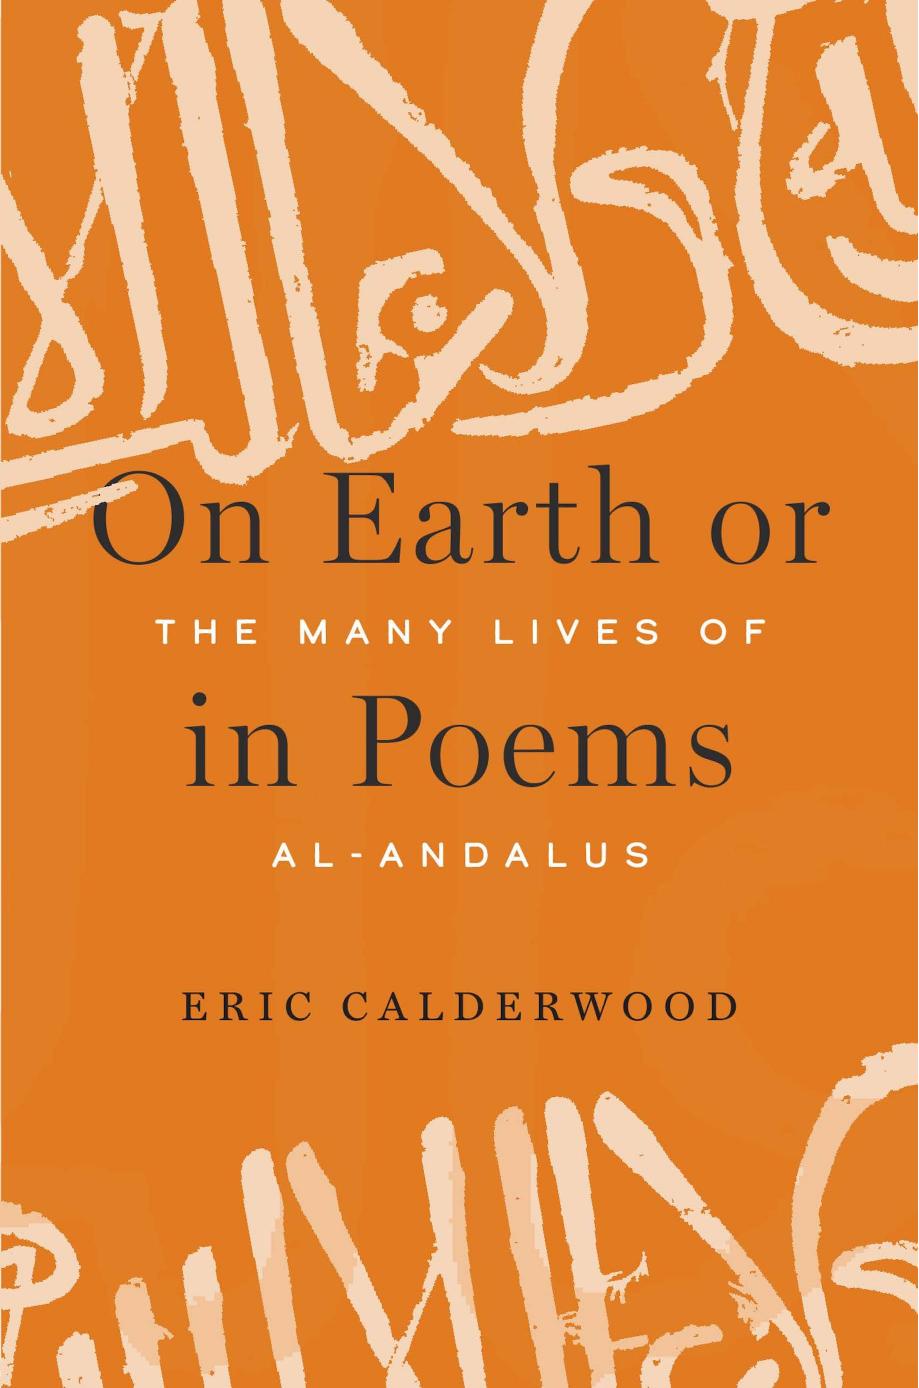 On Earth or in Poems by Eric Calderwood